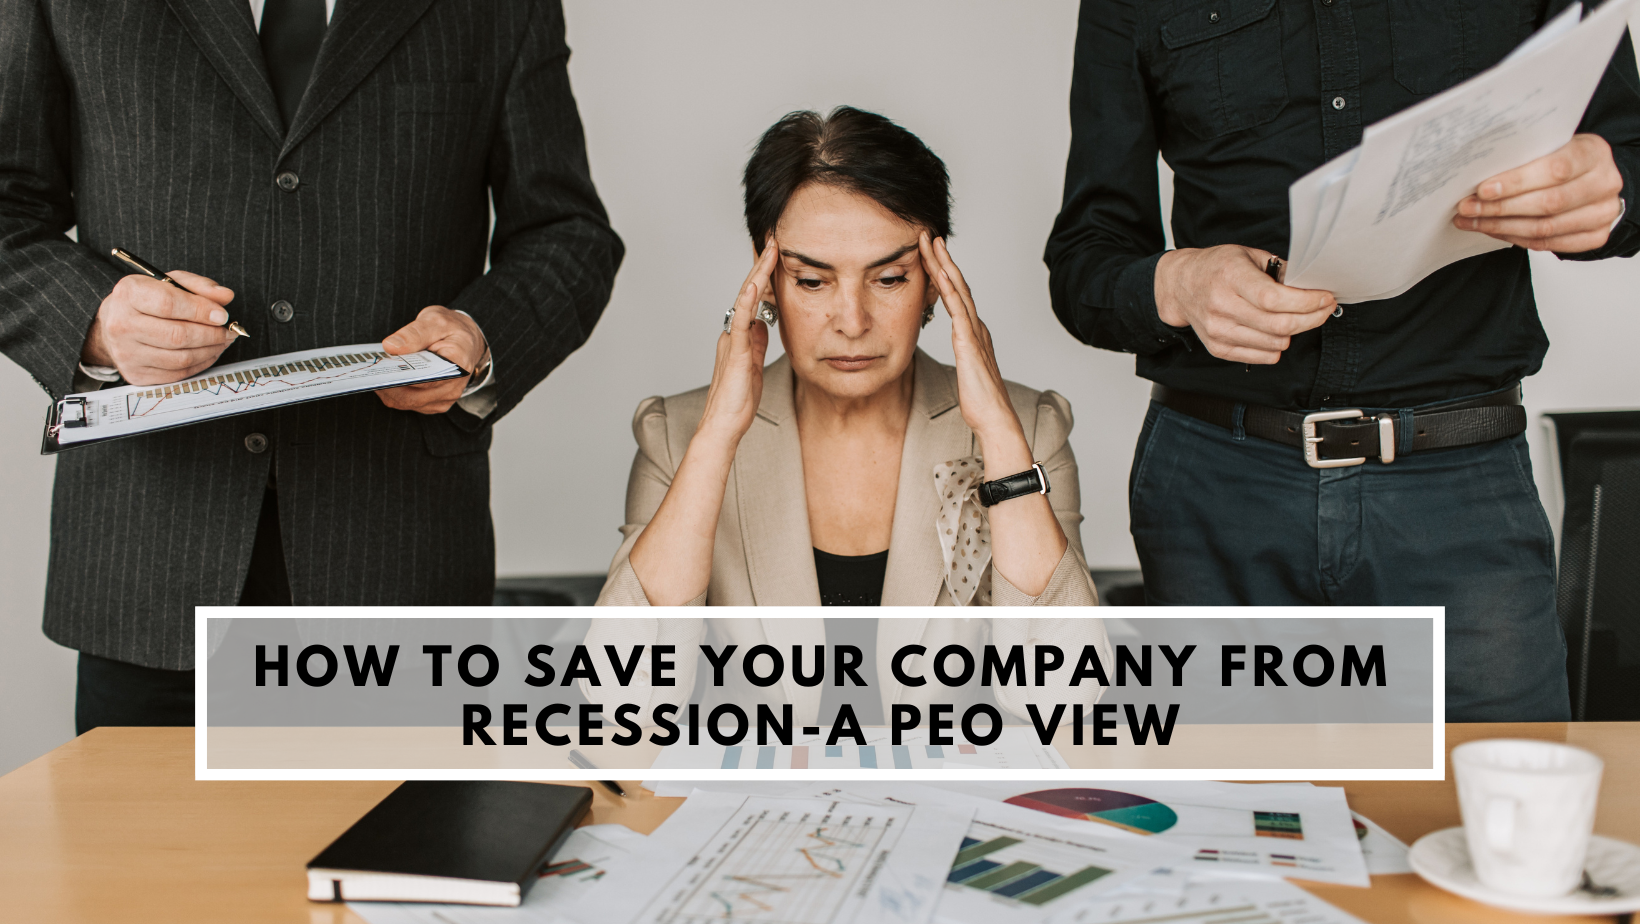 How to save your company from a recession